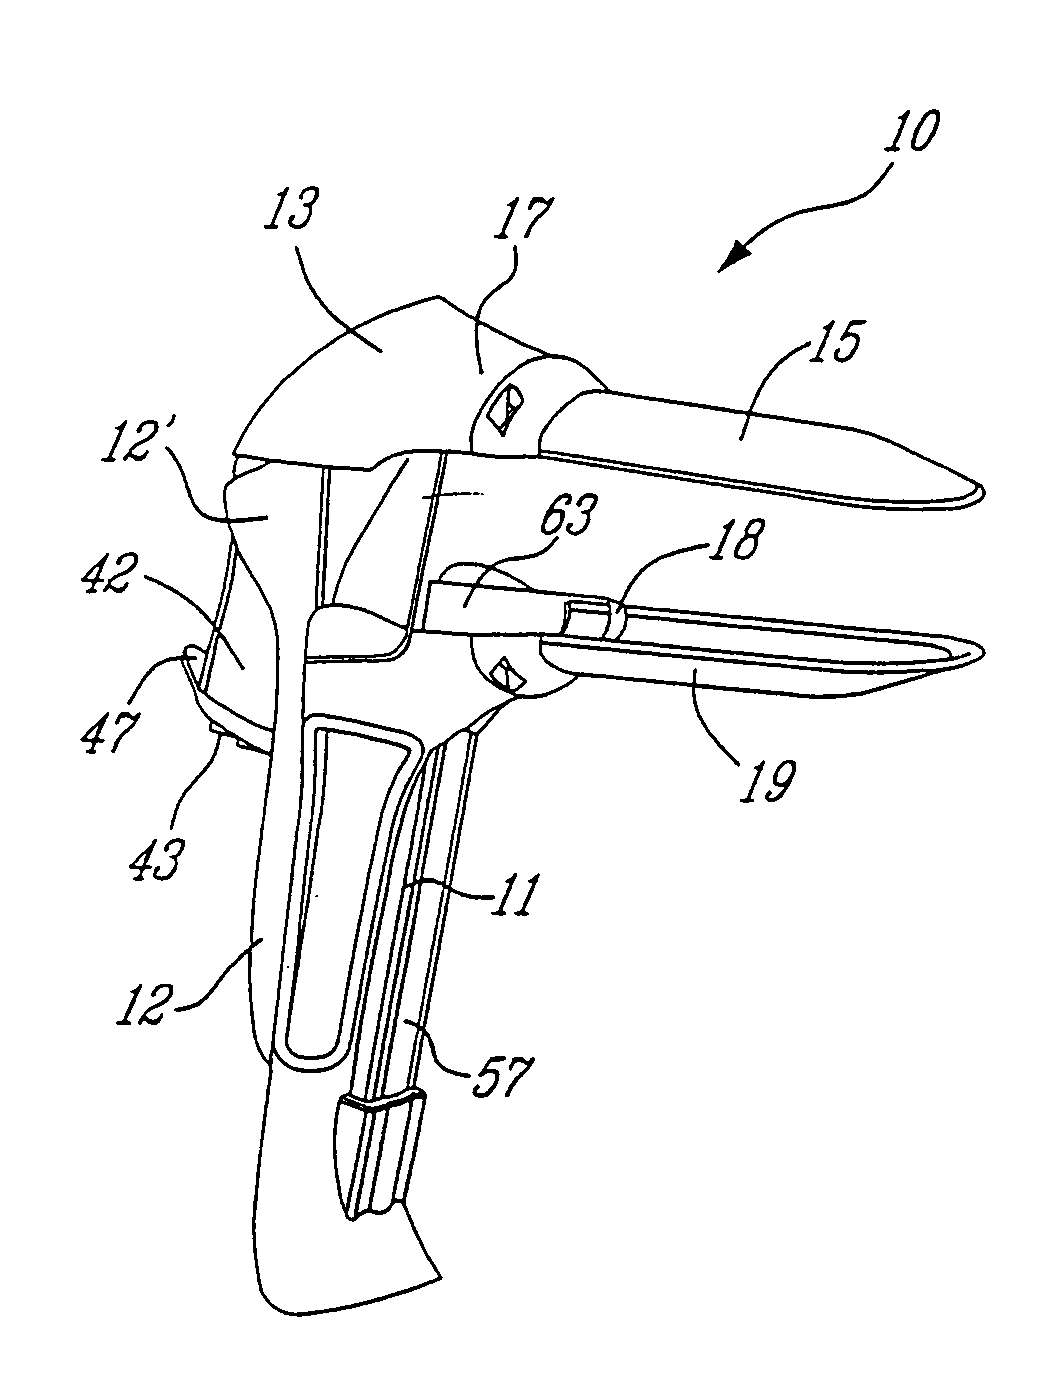 Multi-positionable vaginal speculum with removable blades